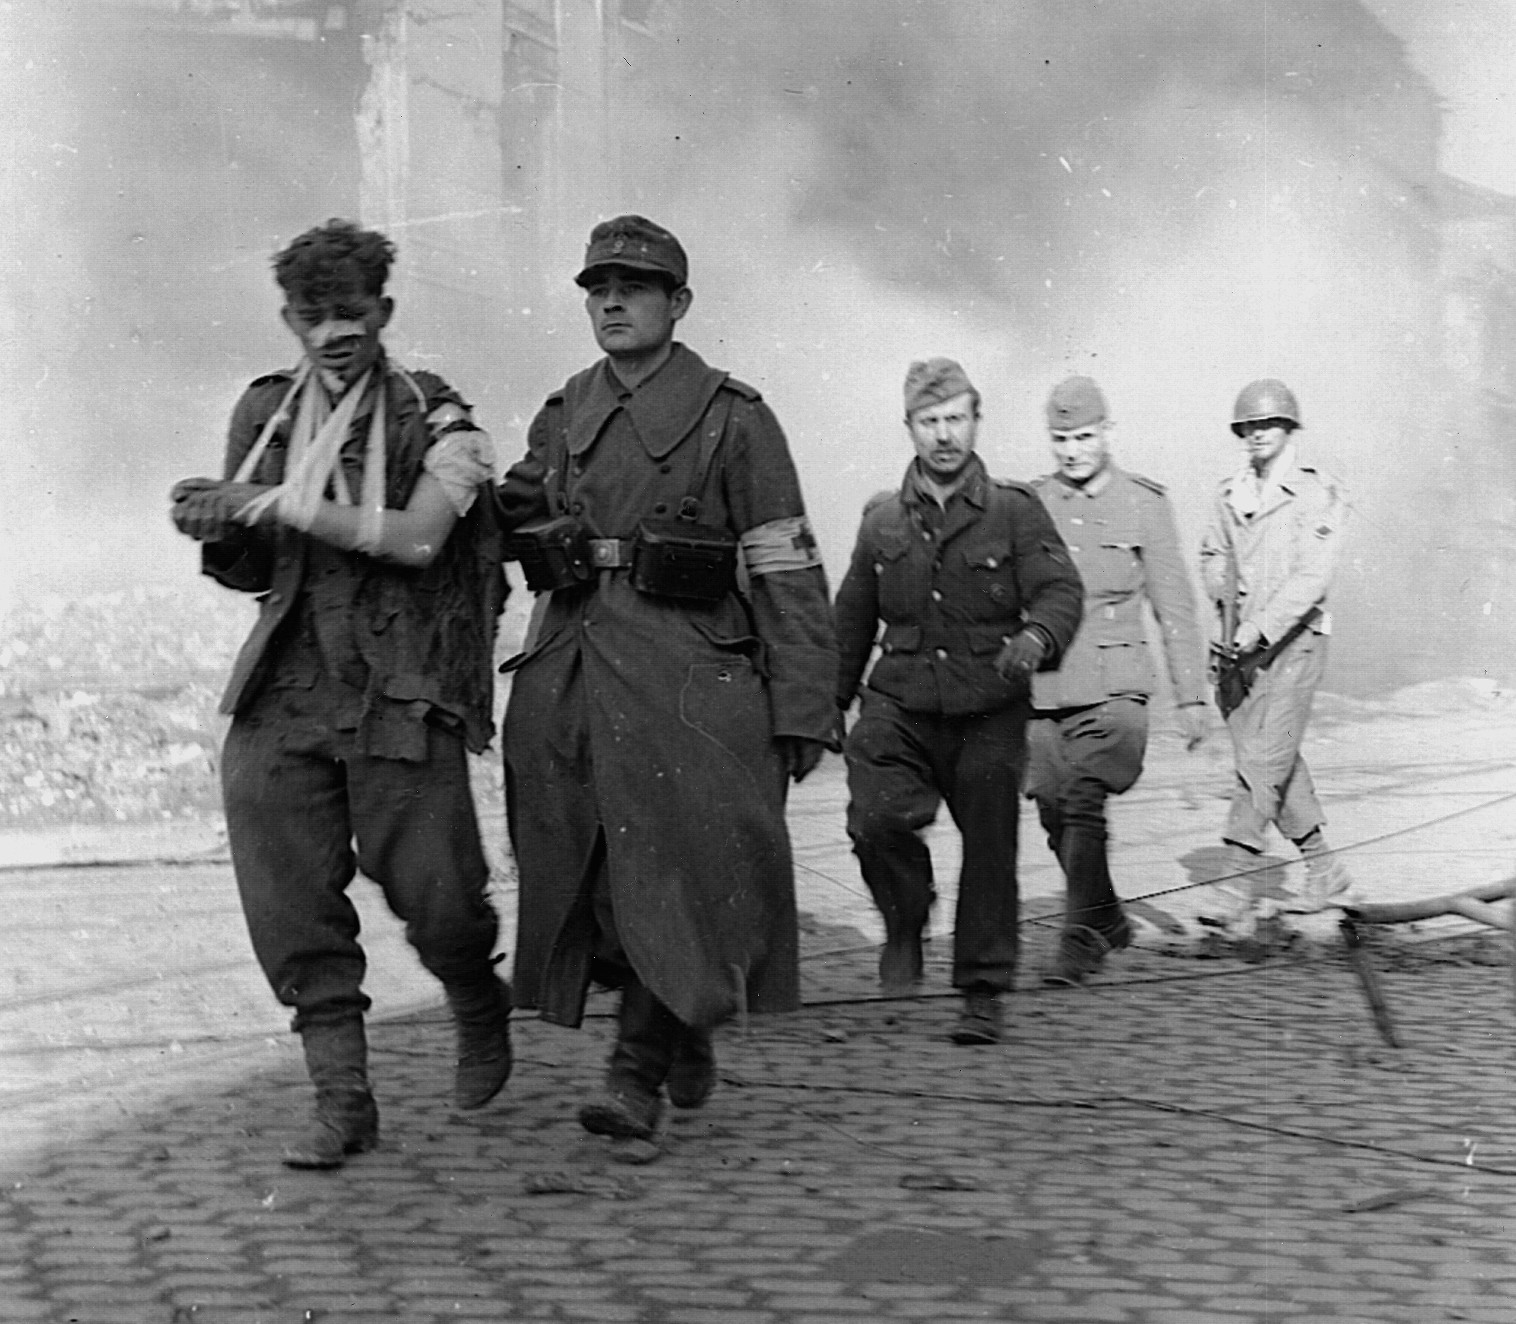 On October 5, 1944, wounded German prisoners are marched westward through the now quiet streets of Aachen. The U.S. 1st and 30th Divisions lost approximately 4,400 killed and wounded during the fight for the city. (National Archives)